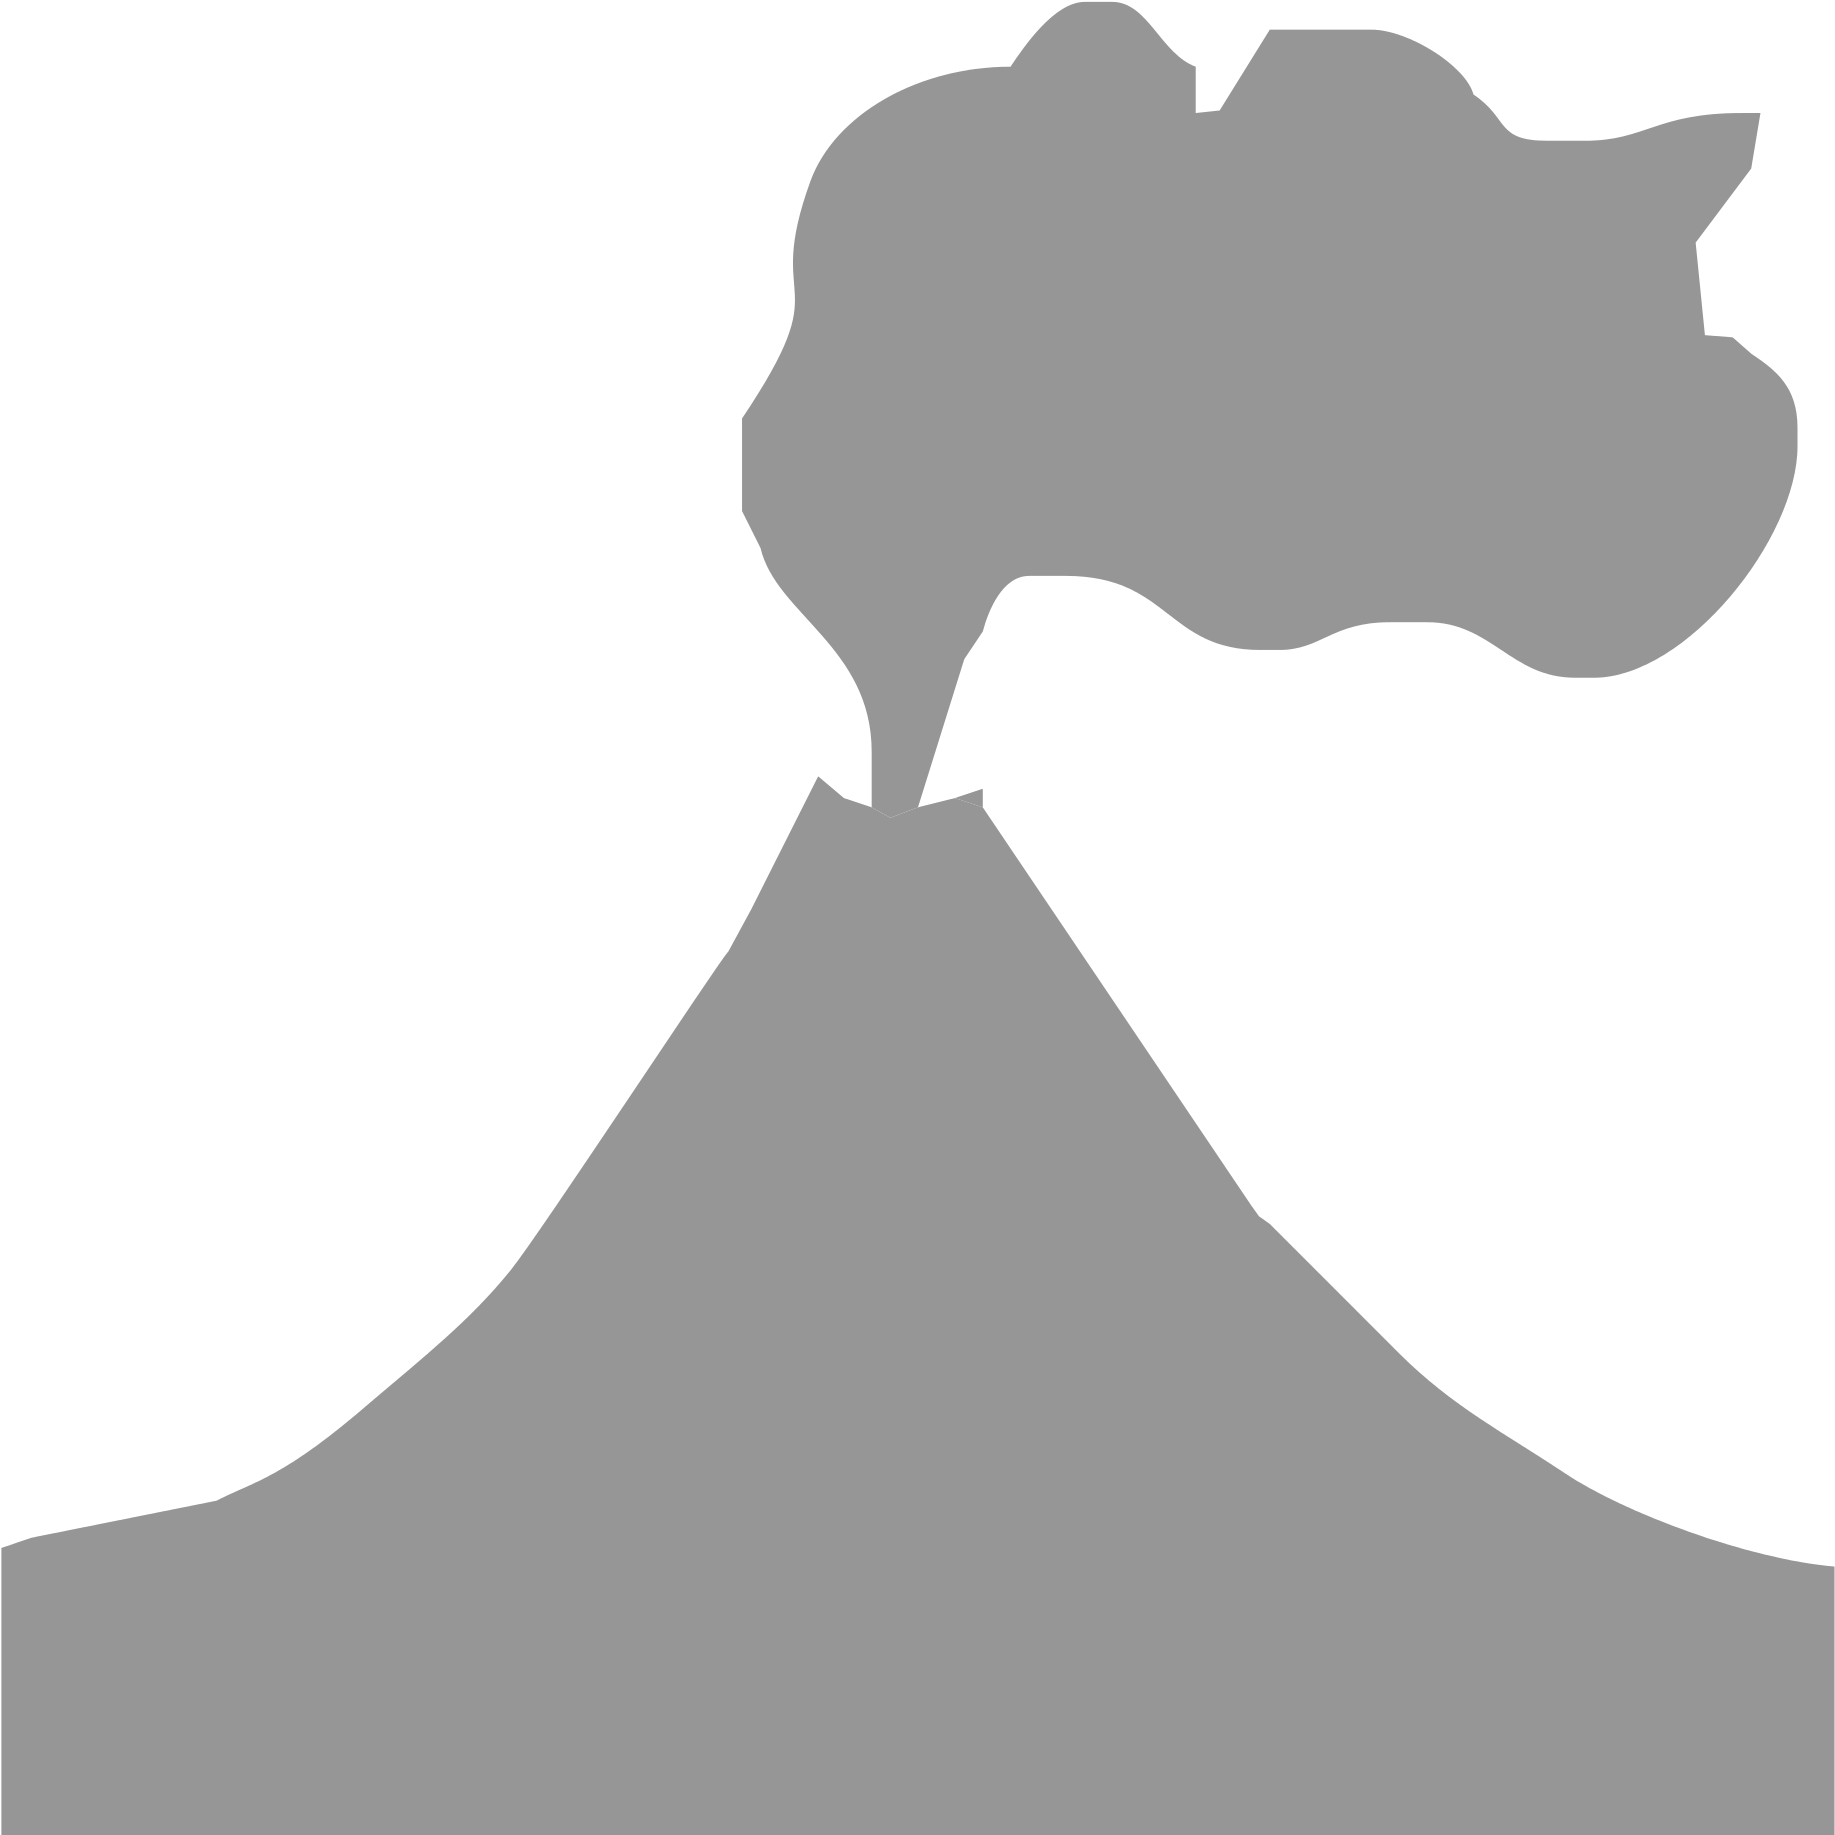 Volcano Icon - Black And White Volcano Png (2000x2000), Png Download